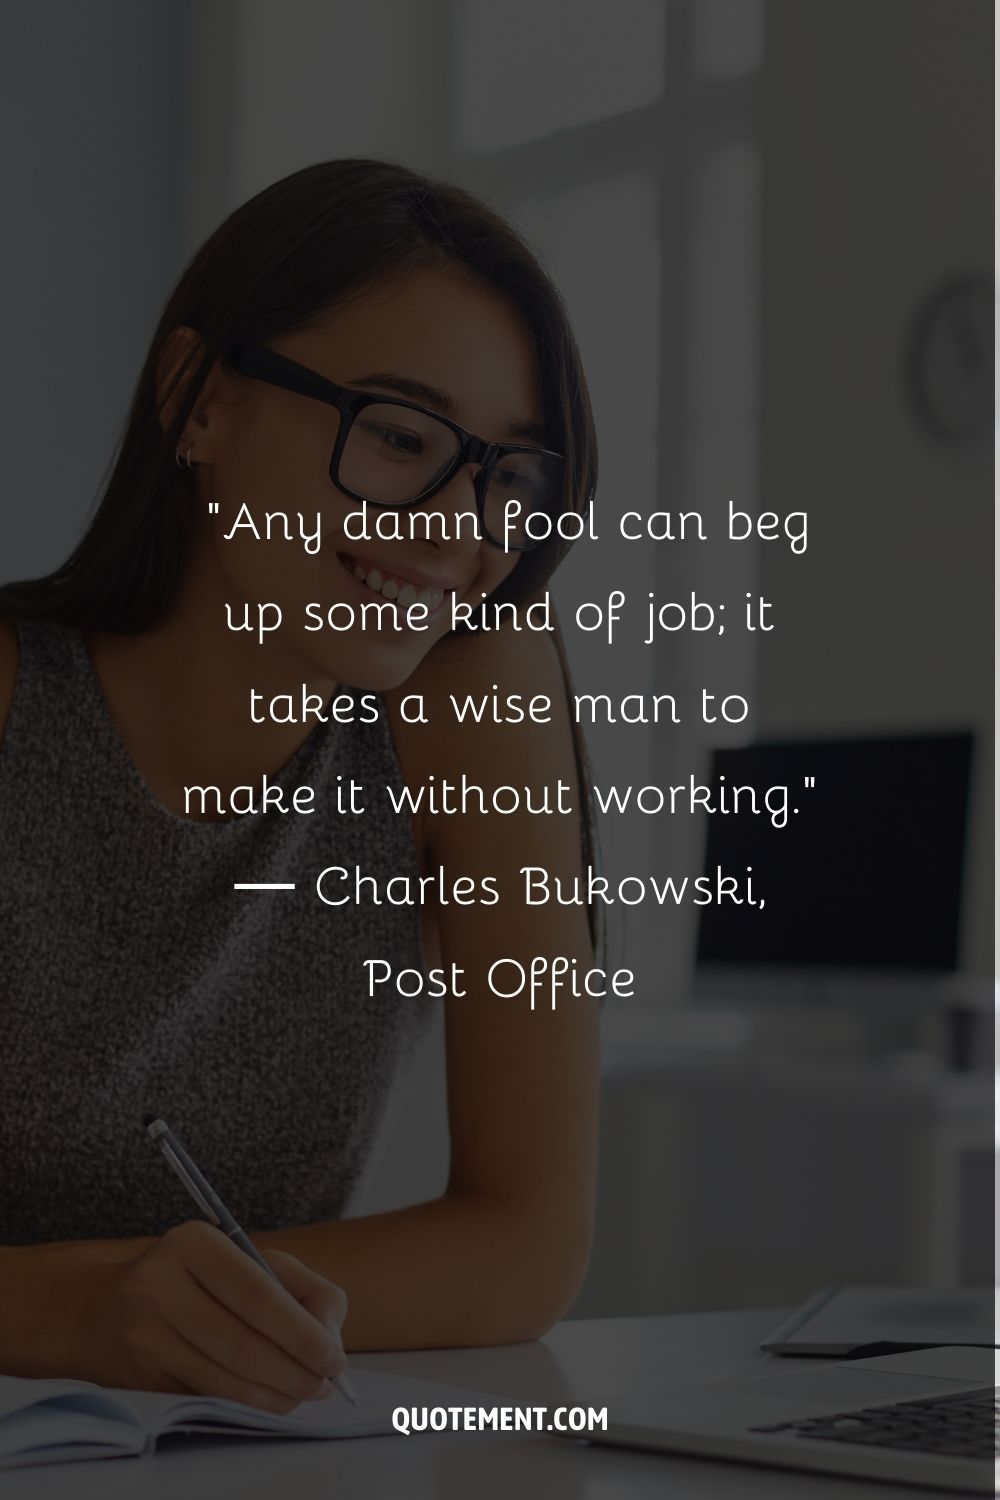 “Any damn fool can beg up some kind of job; it takes a wise man to make it without working.” ― Charles Bukowski, Post Office